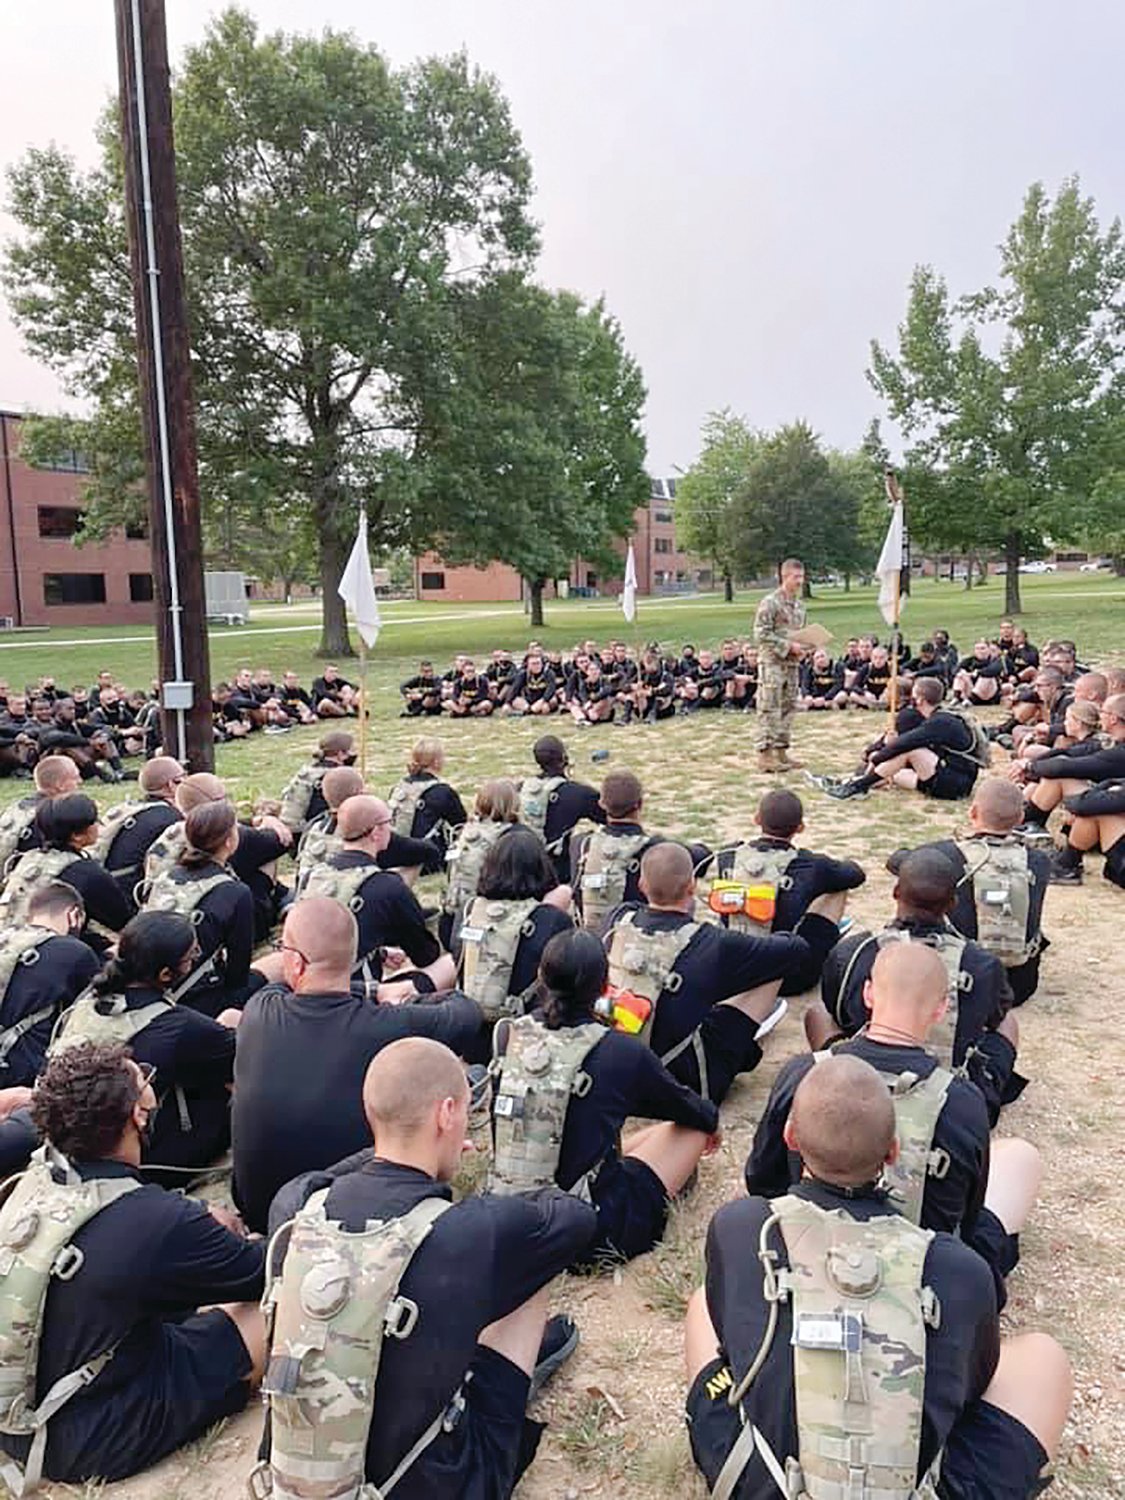 As a U.S. Army chaplain at Fort Leonard Wood, Missouri, Father Luke Willenberg guided thousands of new recruits through Basic Training. He says it is a gift for him to also be able to meet the spiritual needs of the soldiers and their families.